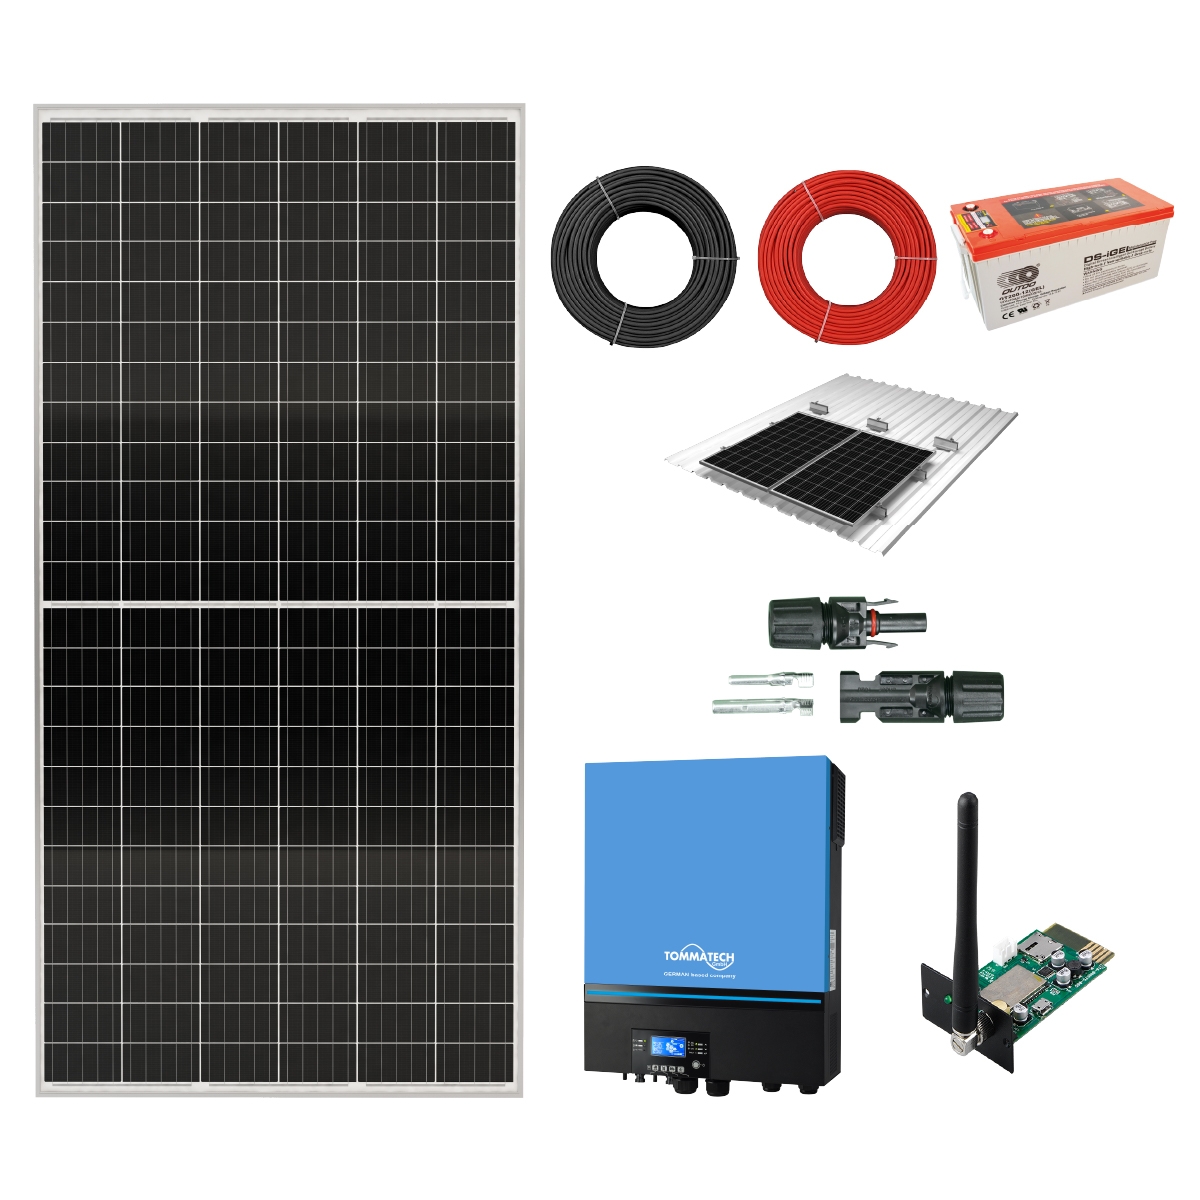 3.6kW / 3.64kWp / 19.2kWh / 1~ MPPT Solar Off-Grid Solution